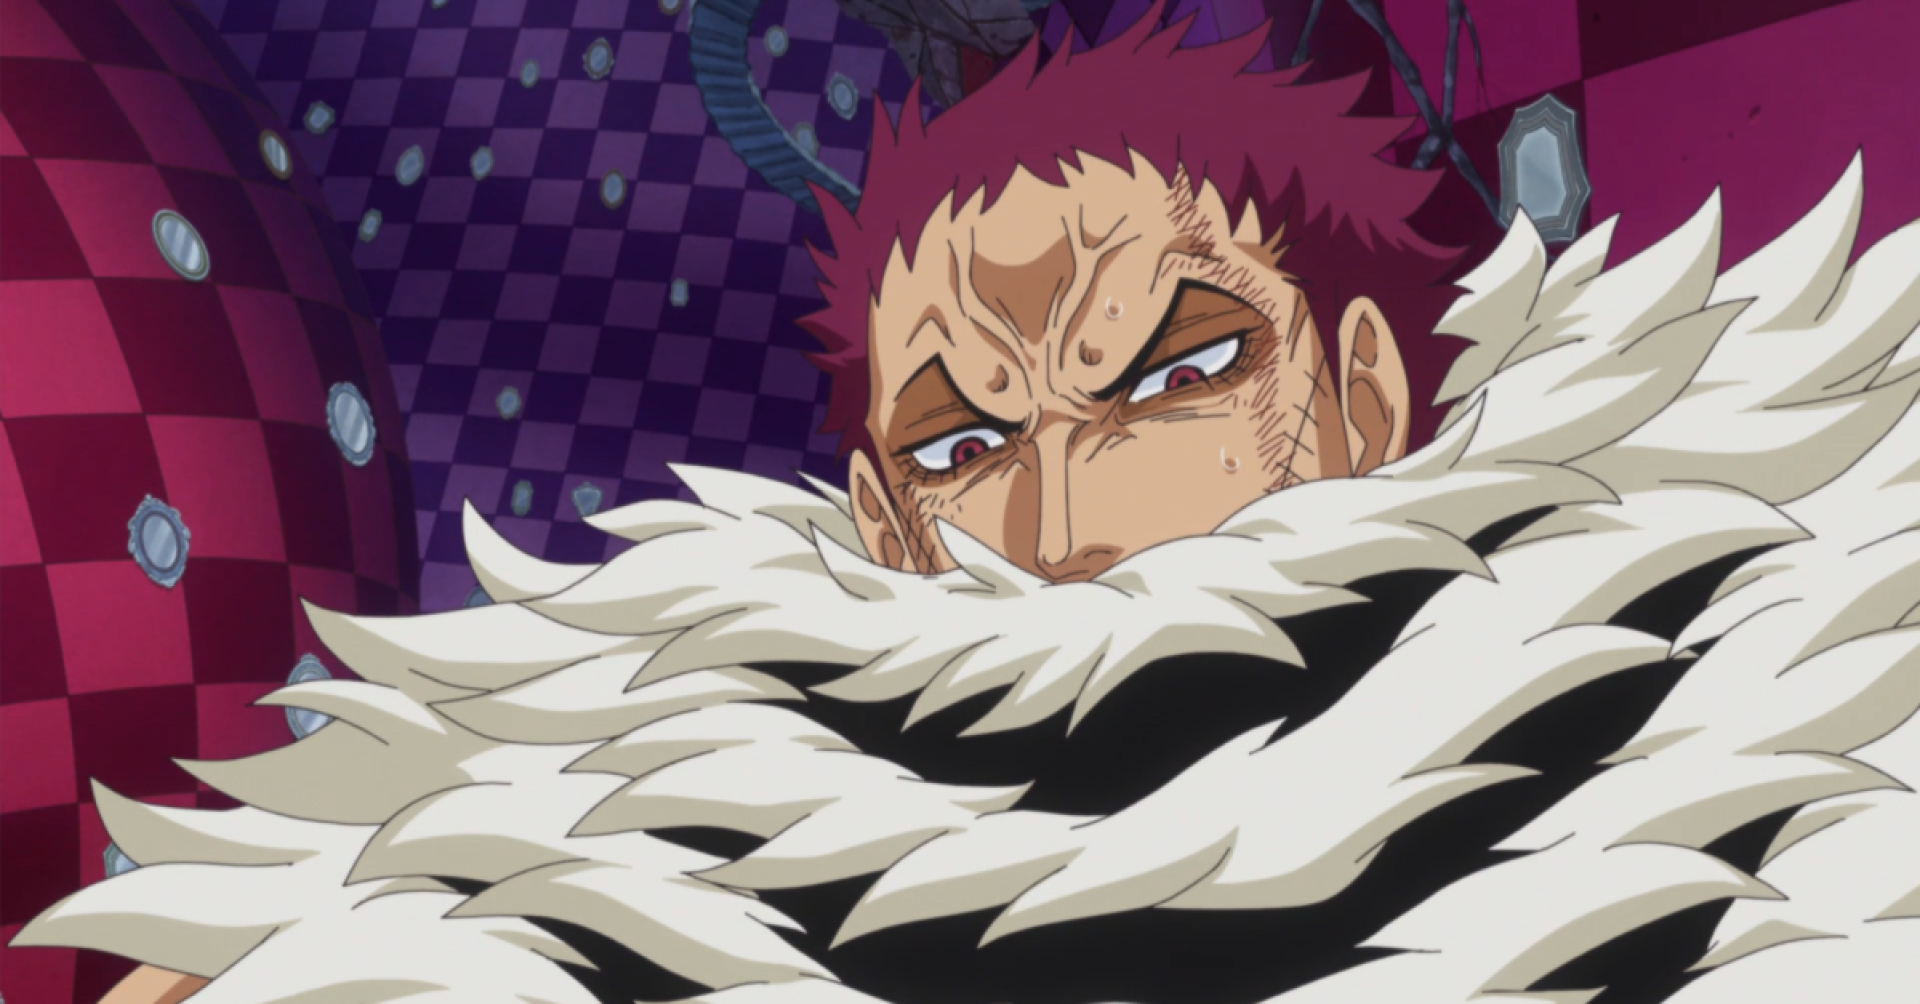 Katakuri from One Piece looking ticked off